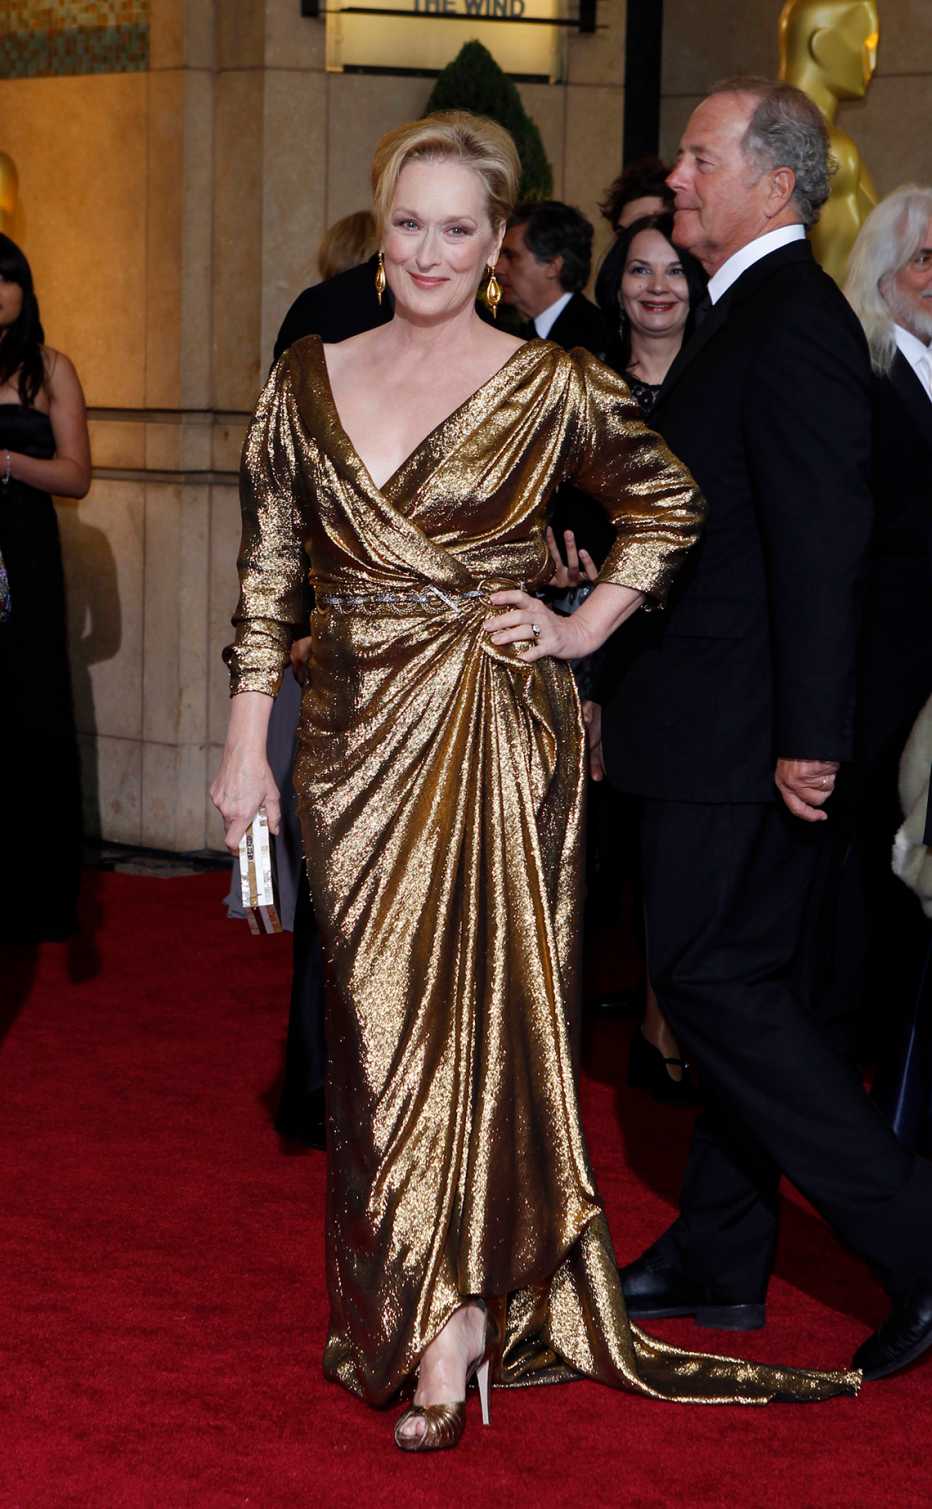 Meryl Streep wearing a gold dress on the red carpet at the 84th Annual Academy Awards